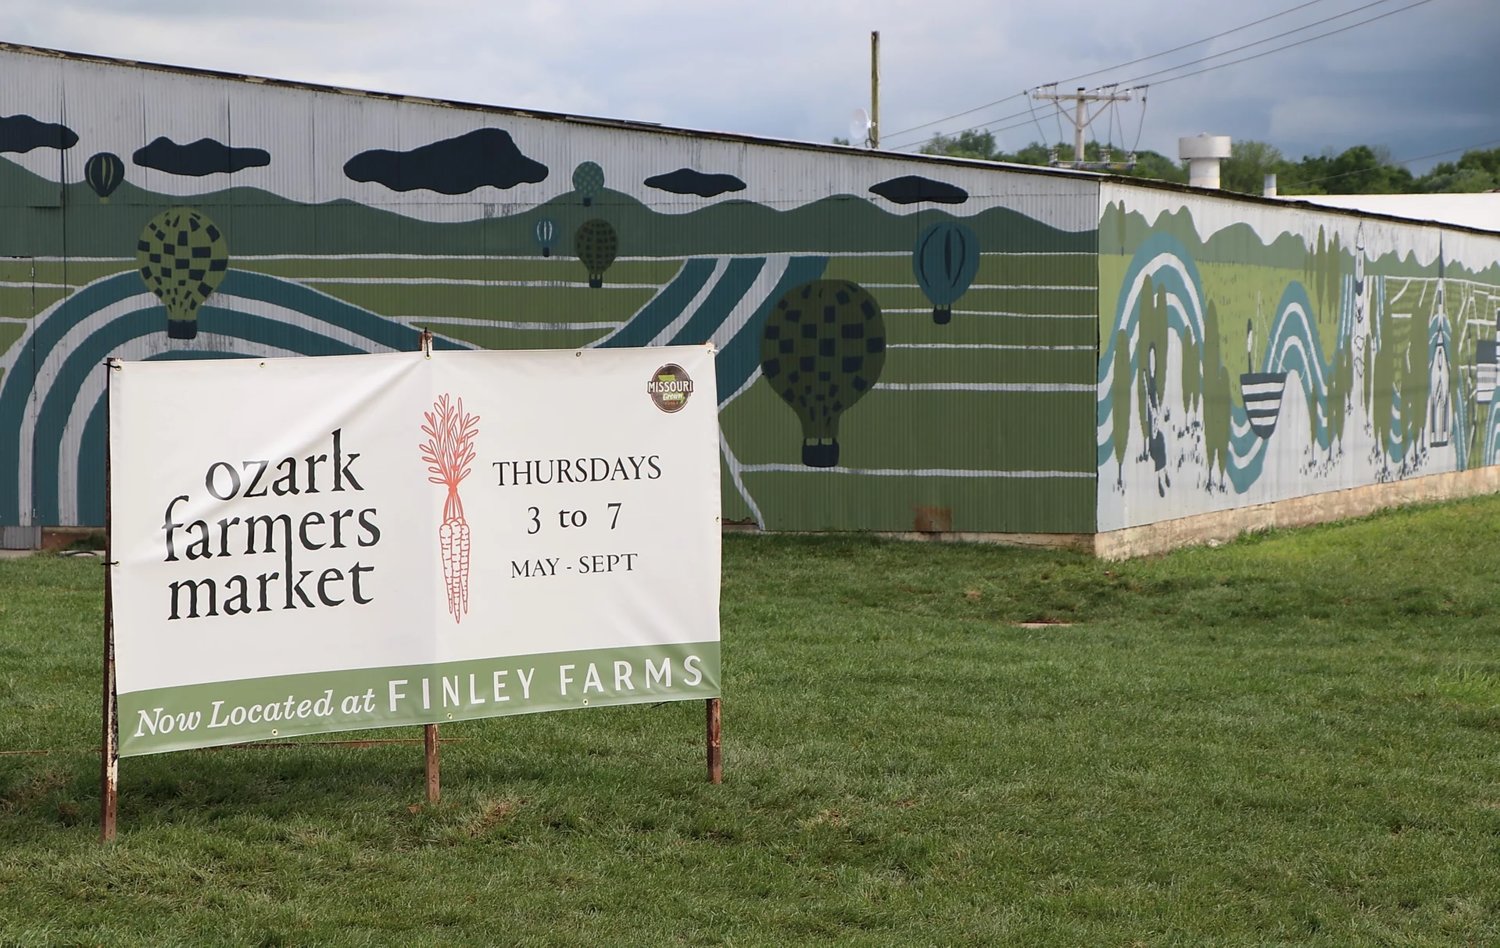 Ozark Farmers Market is returning to Finley Farms May 7 and offers drive-thru and pre-order options for customers.